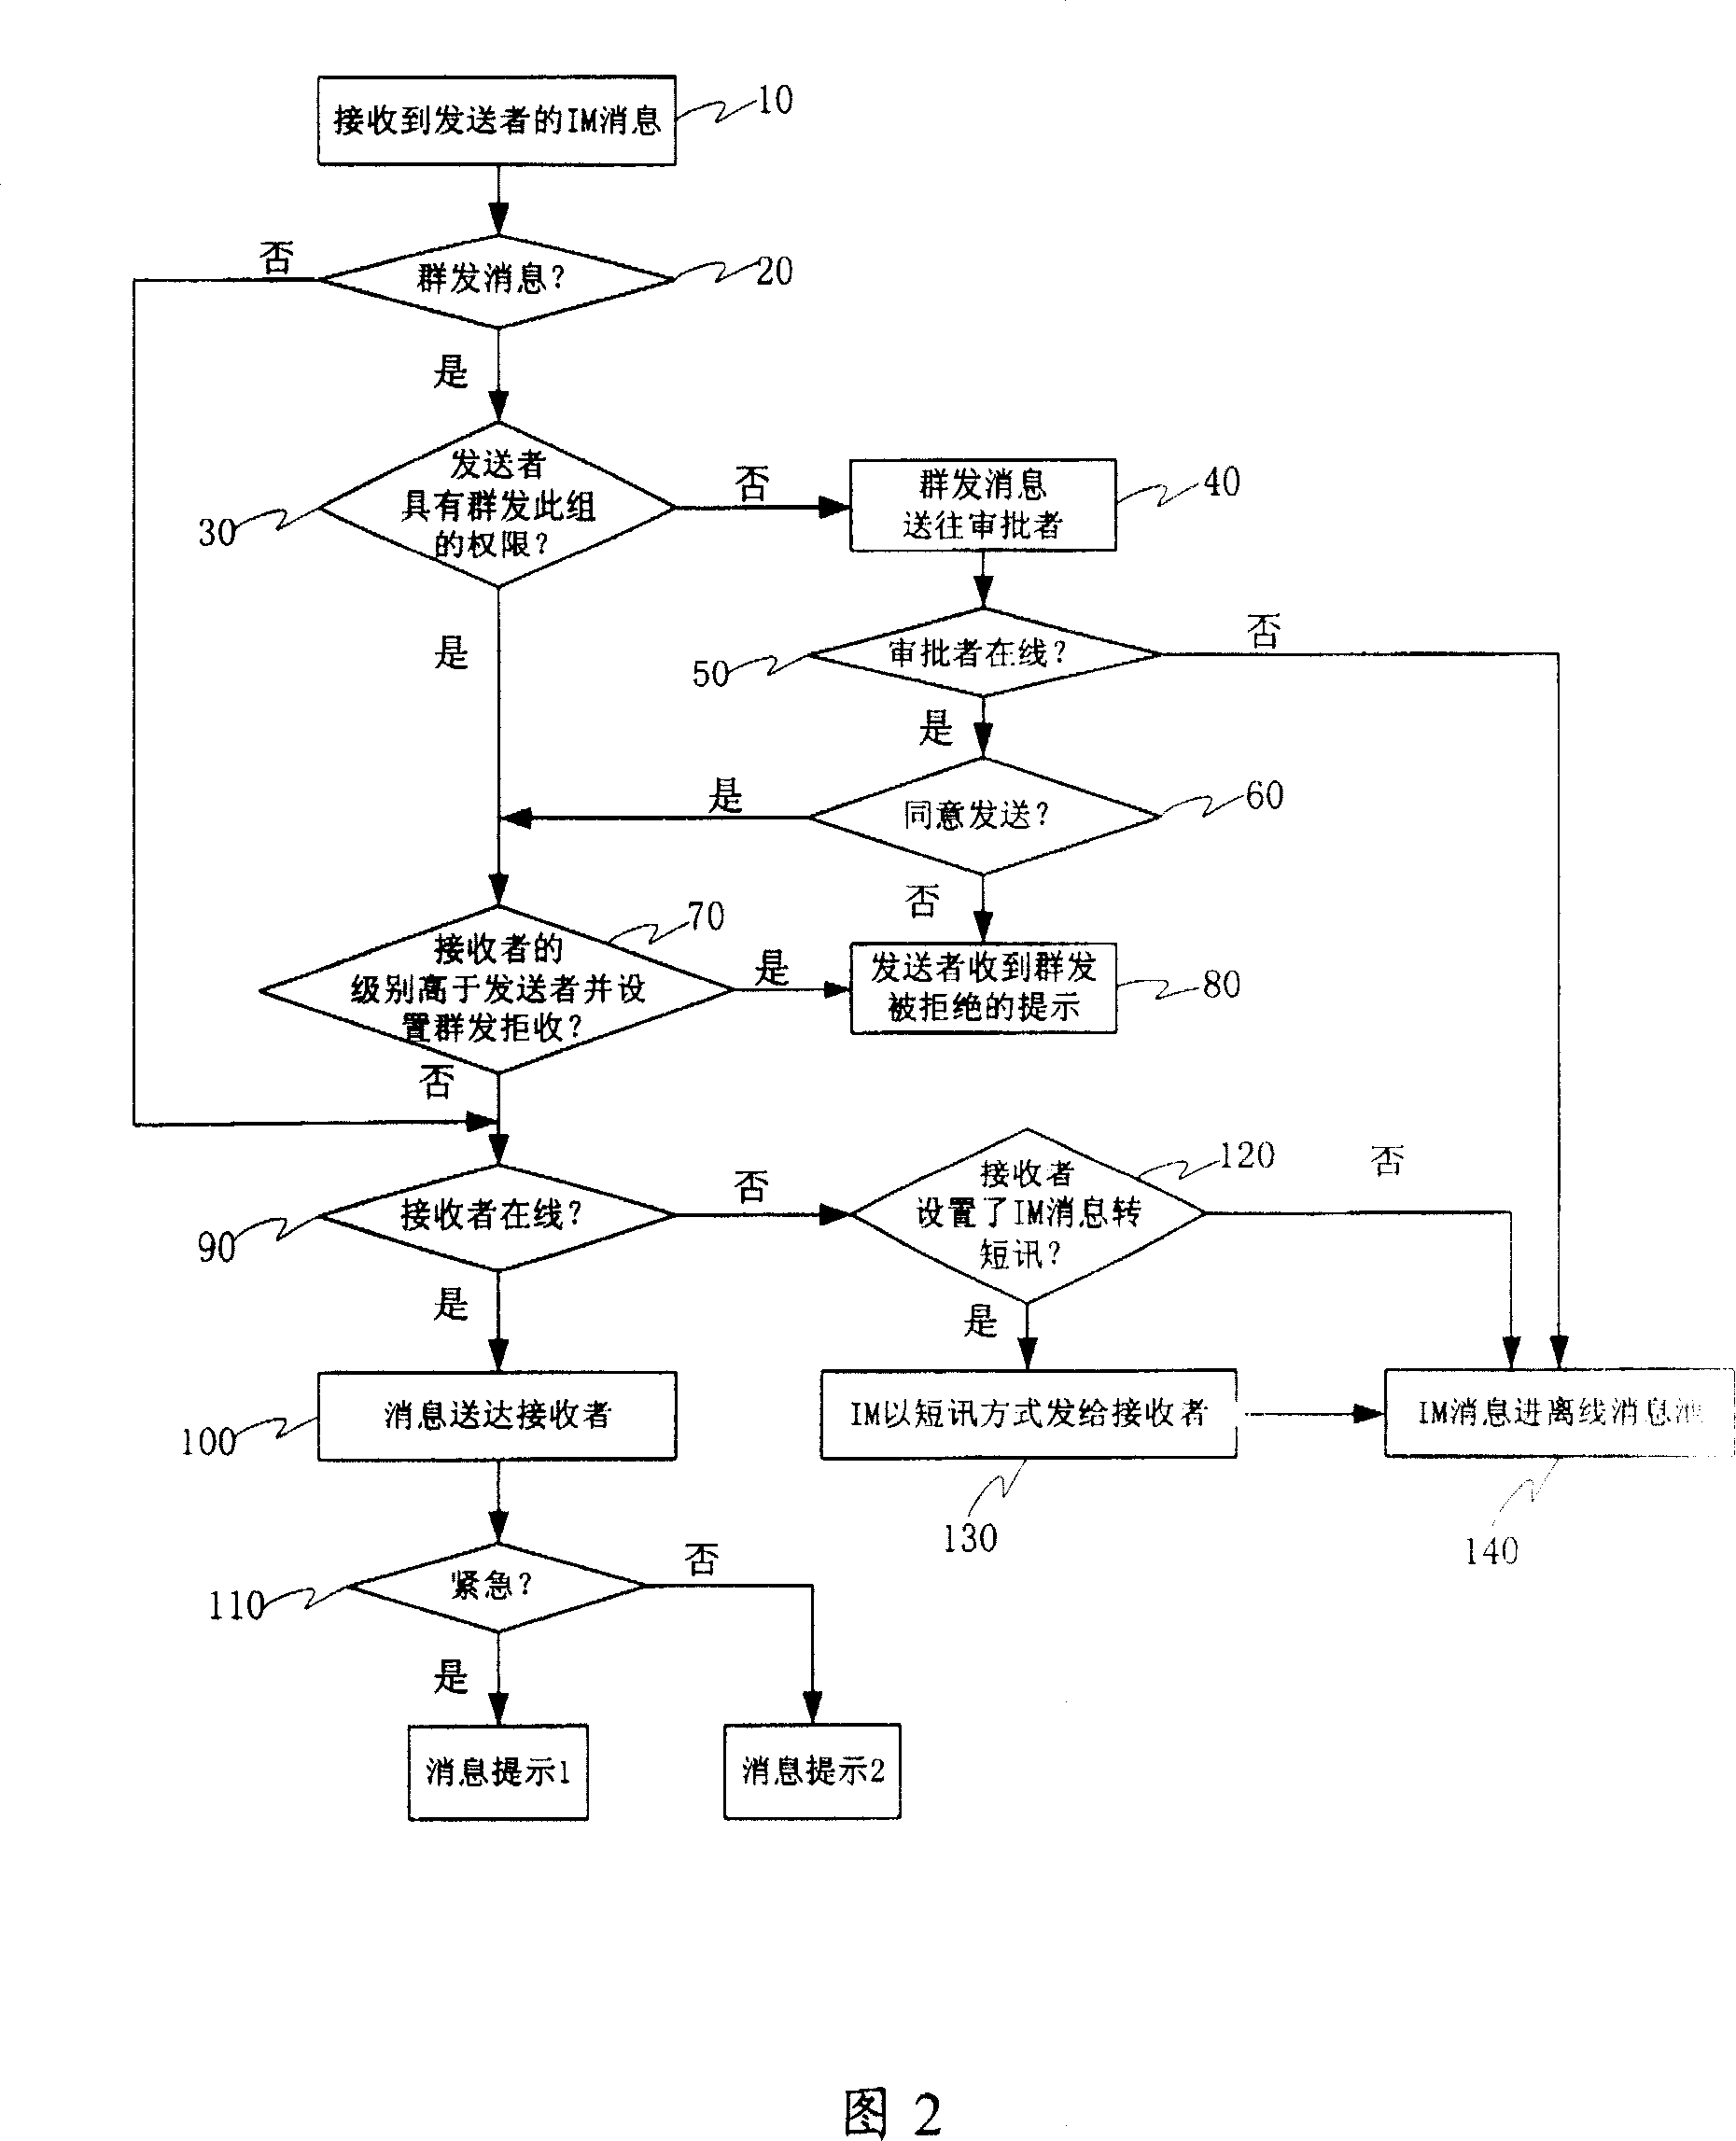 Method for controlling instant messages in instant messaging system